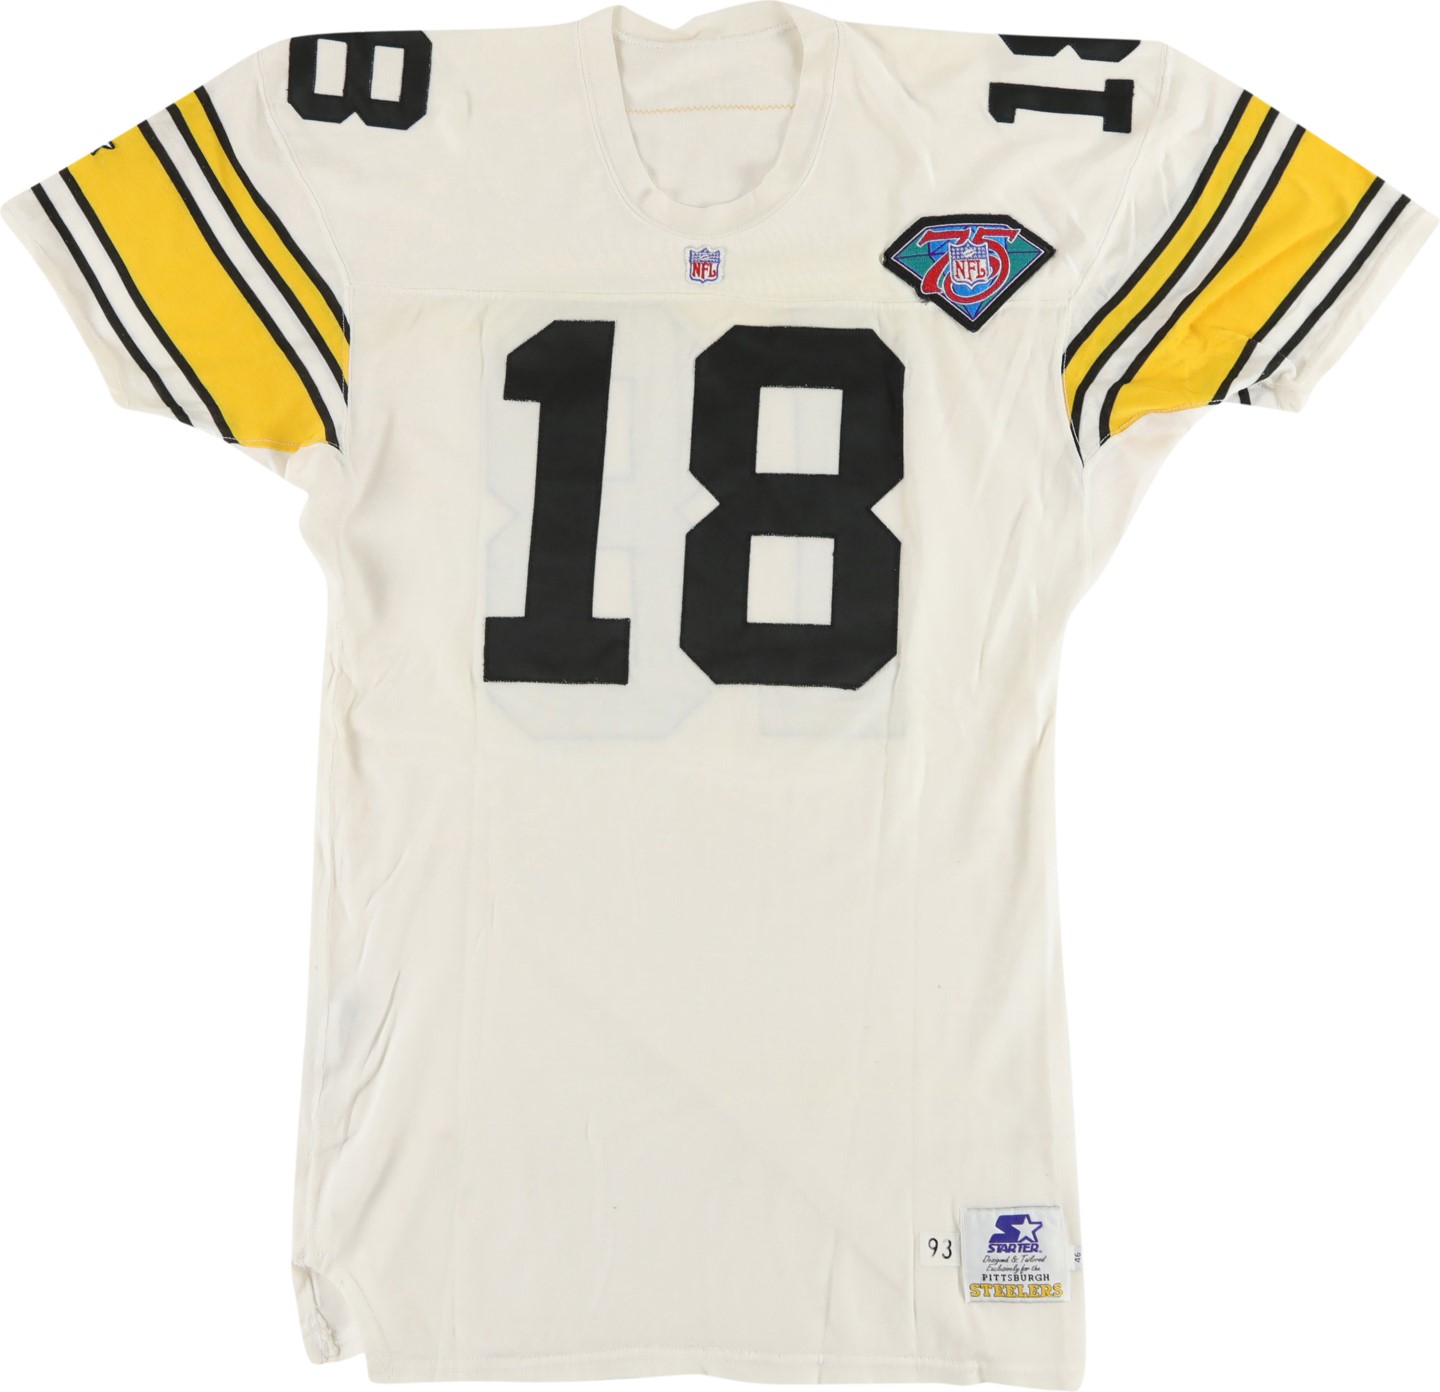 The Pittsburgh Steelers Game Worn Jersey Archive - 1994 Mike Tomczak Game Worn Pittsburgh Steelers Jersey